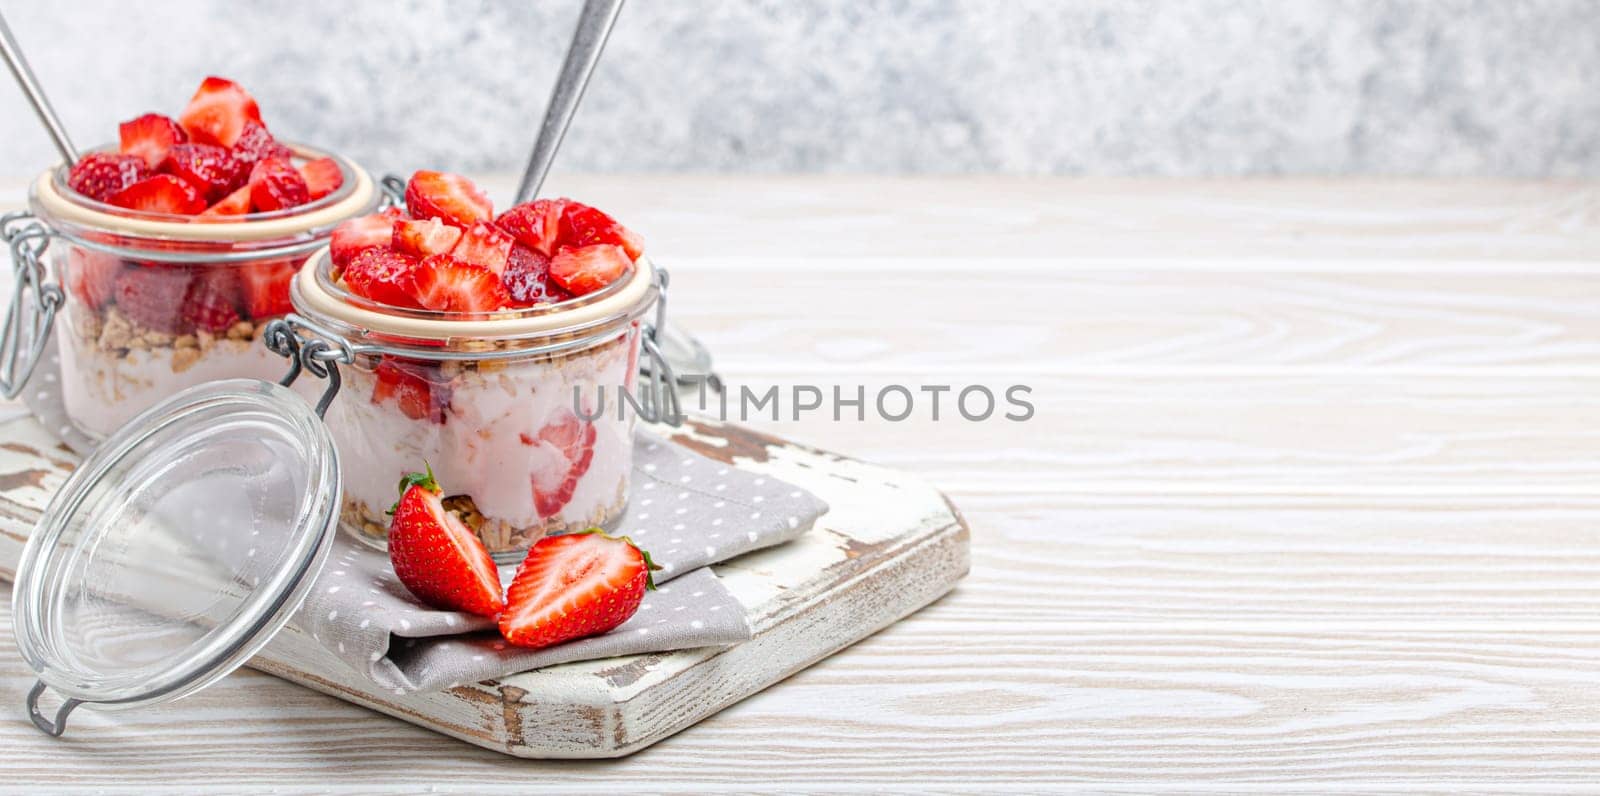 Parfait with Fresh Strawberries, Yoghurt and Crunchy Granola in Transparent Glass Mason Jars on White Rustic Wooden Background Angle View, Healthy Breakfast or Light Summer Dessert, Space for Text by its_al_dente